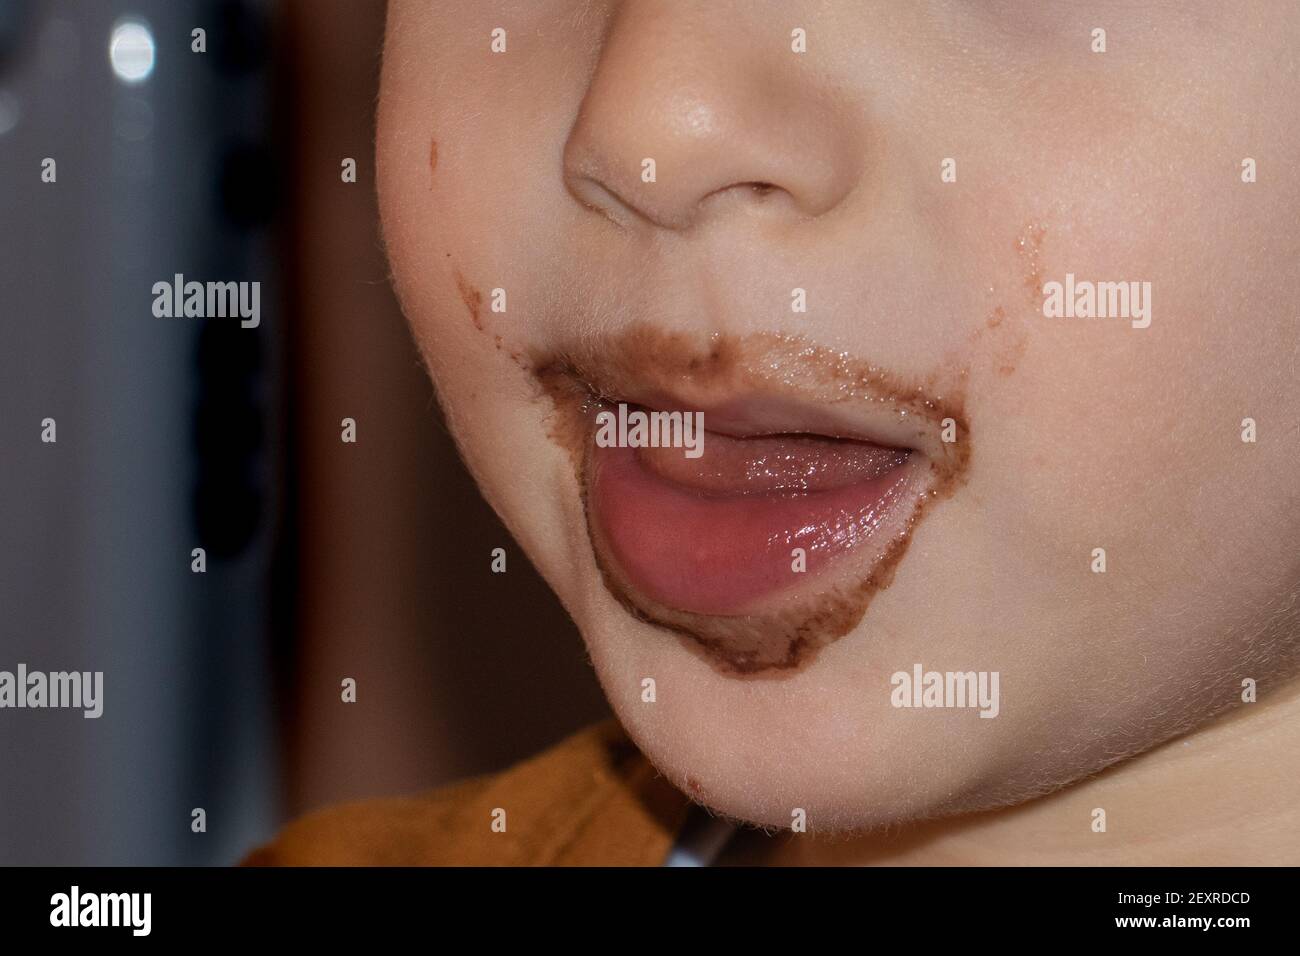 close-up of a cute child's mouth with chocolate-stained lips Stock Photo